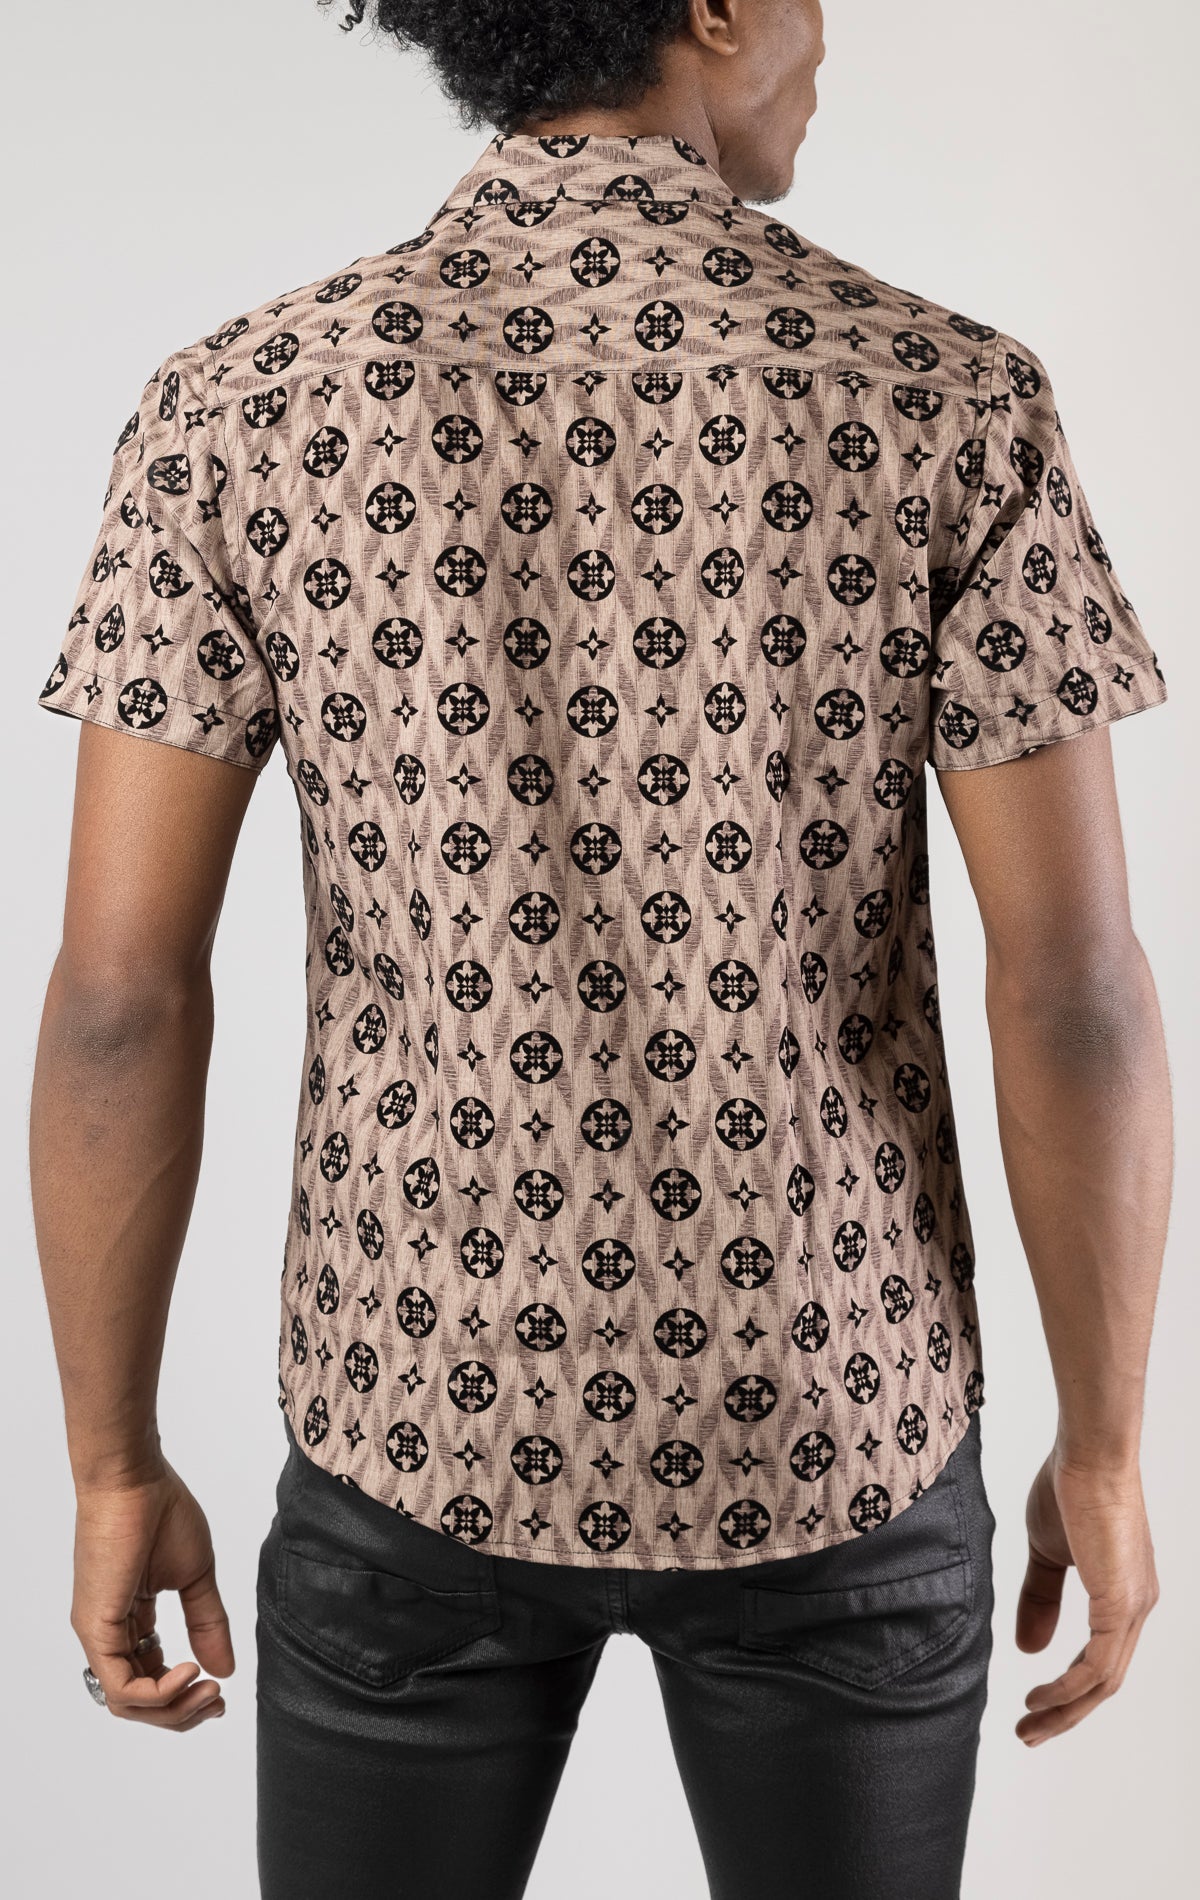 brown Men's casual, relaxed-fit button-down shirt with a short sleeve design. The shirt features an all-over Greek key pattern and a front button closure.